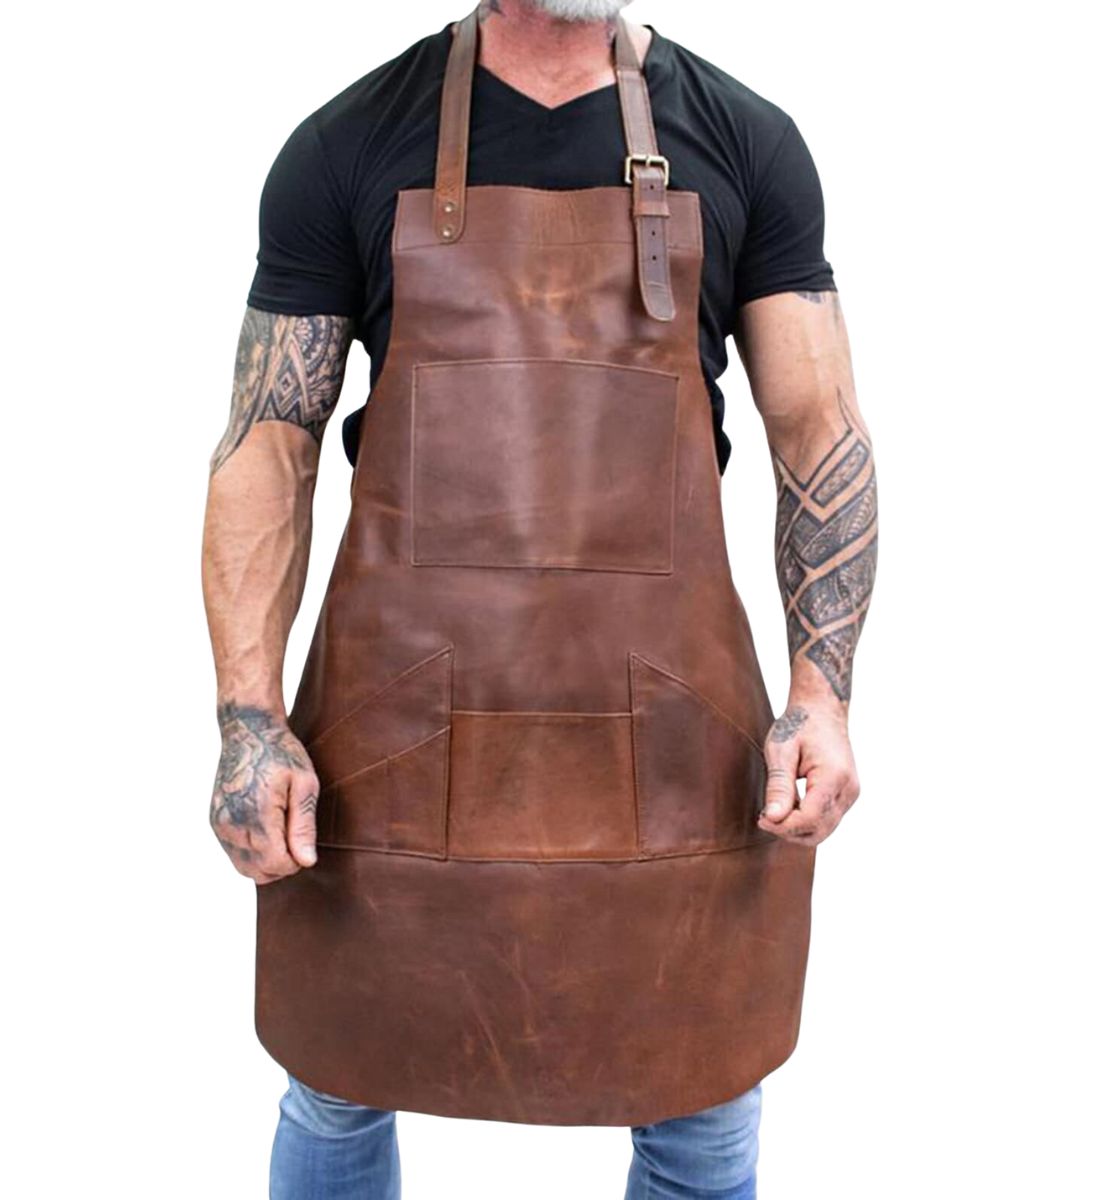 Craftsman's Utility Apron with Pockets